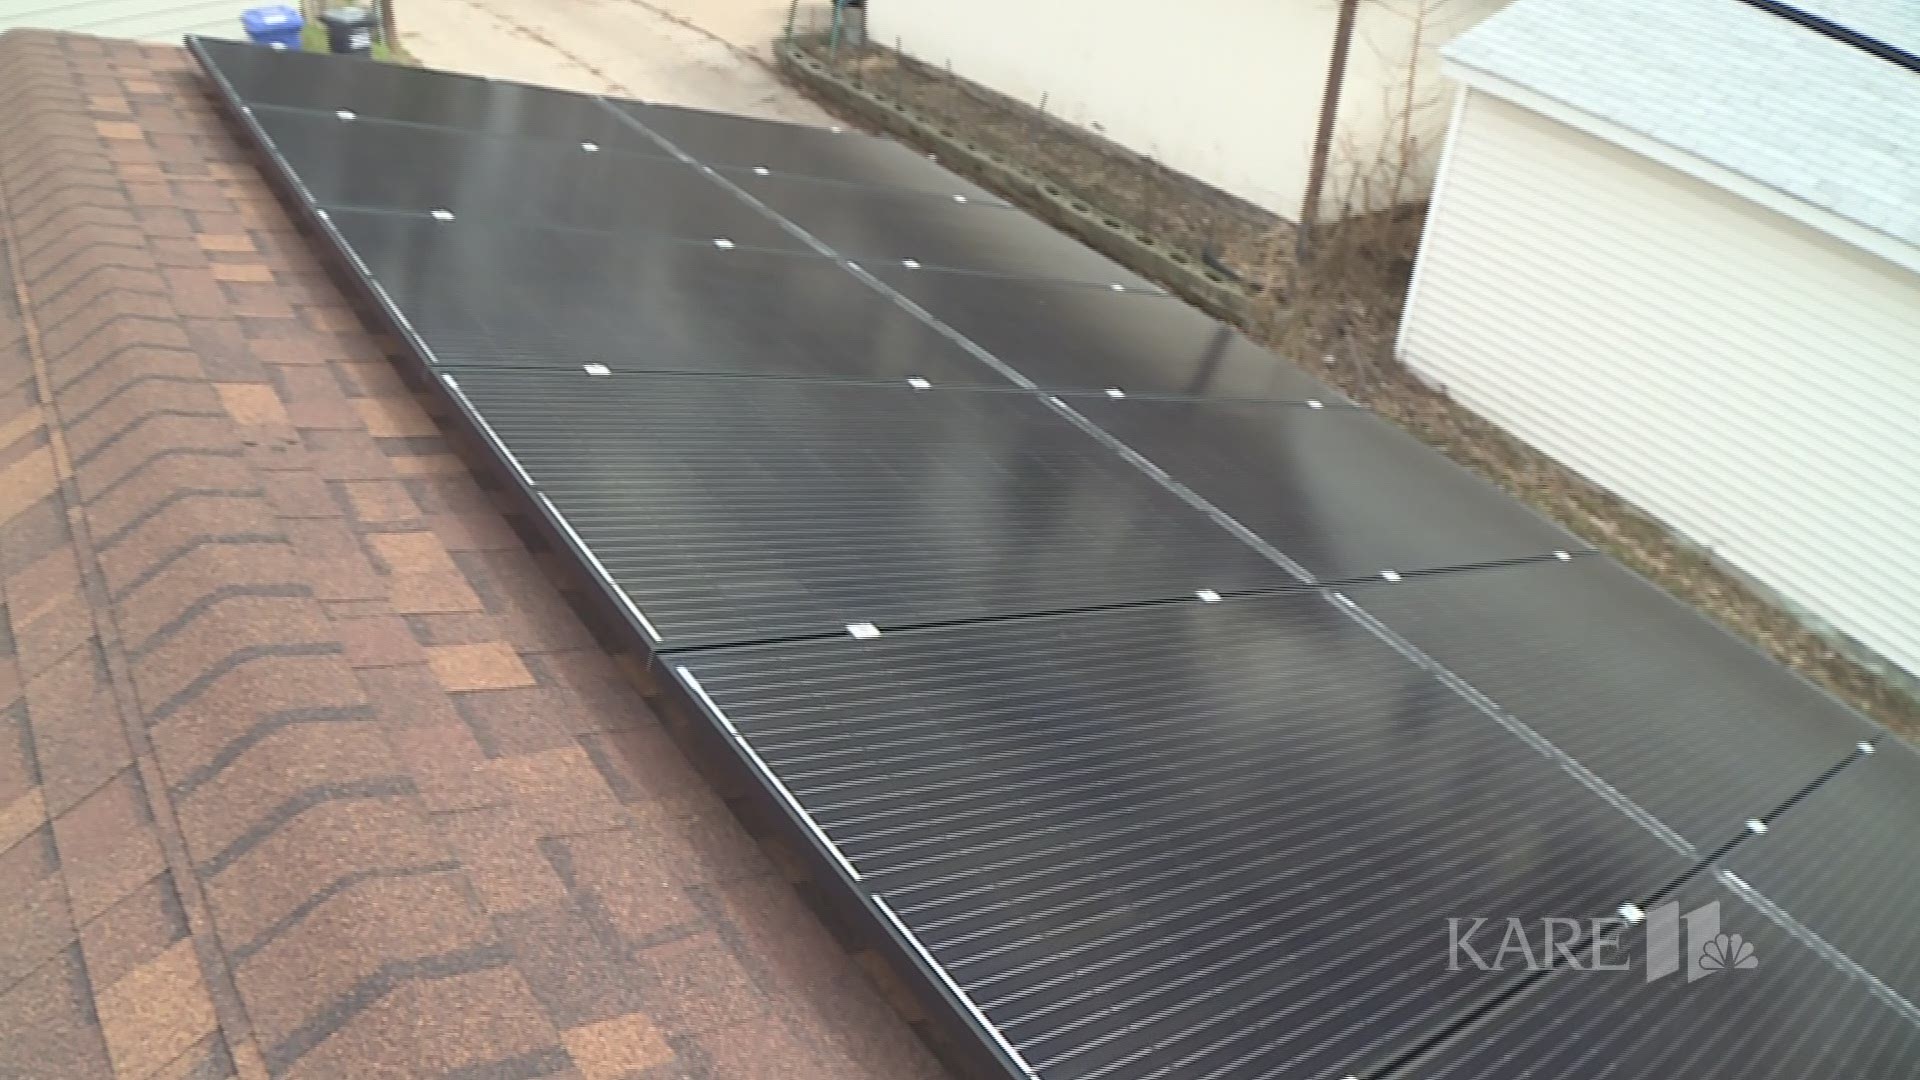 Karl Obermeyer of northeast Minneapolis had solar panels installed at his home last August.